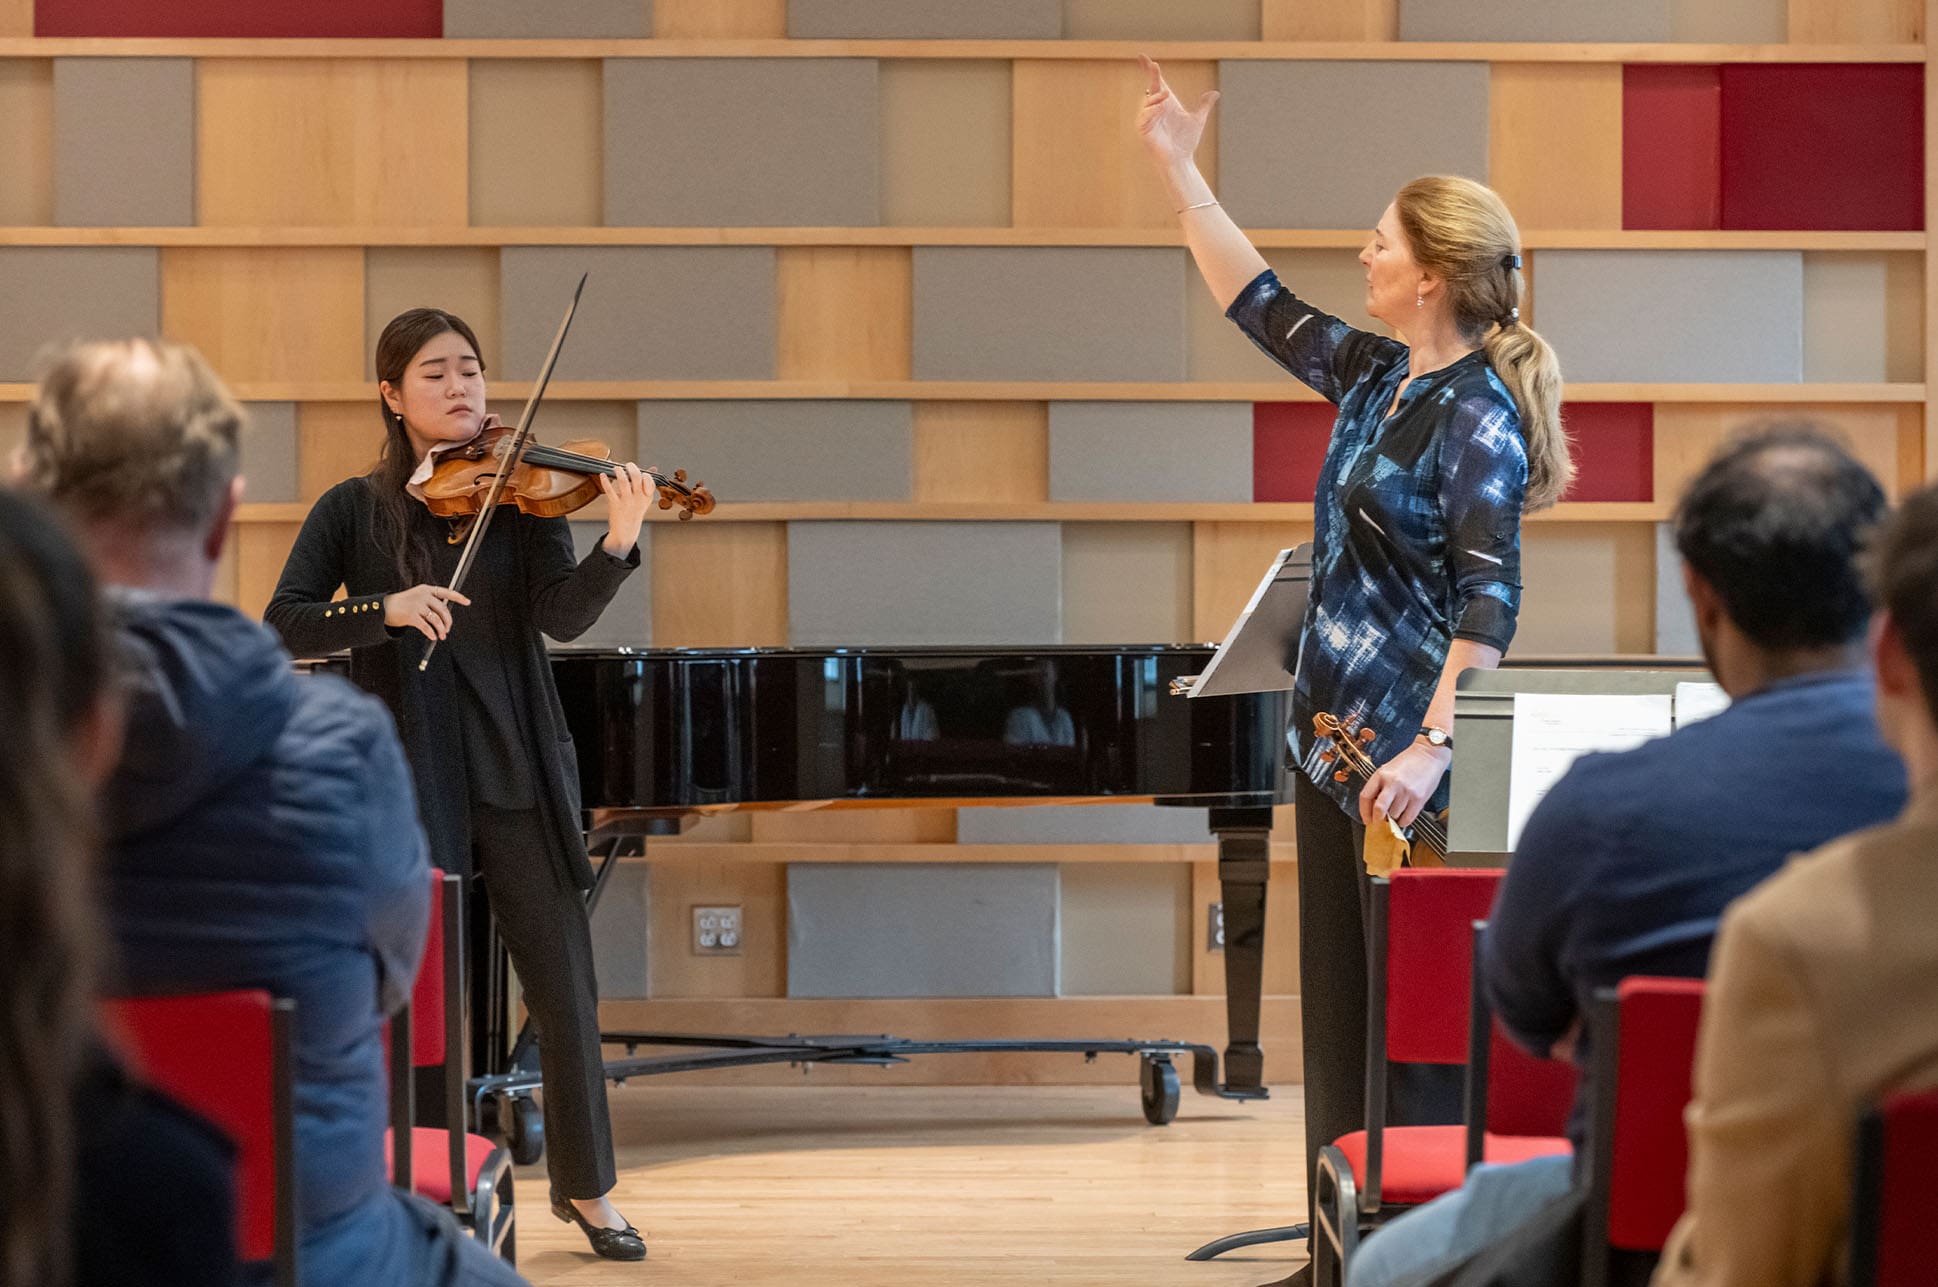 A student performing on violin in front of a classroom with an instructor guiding her.